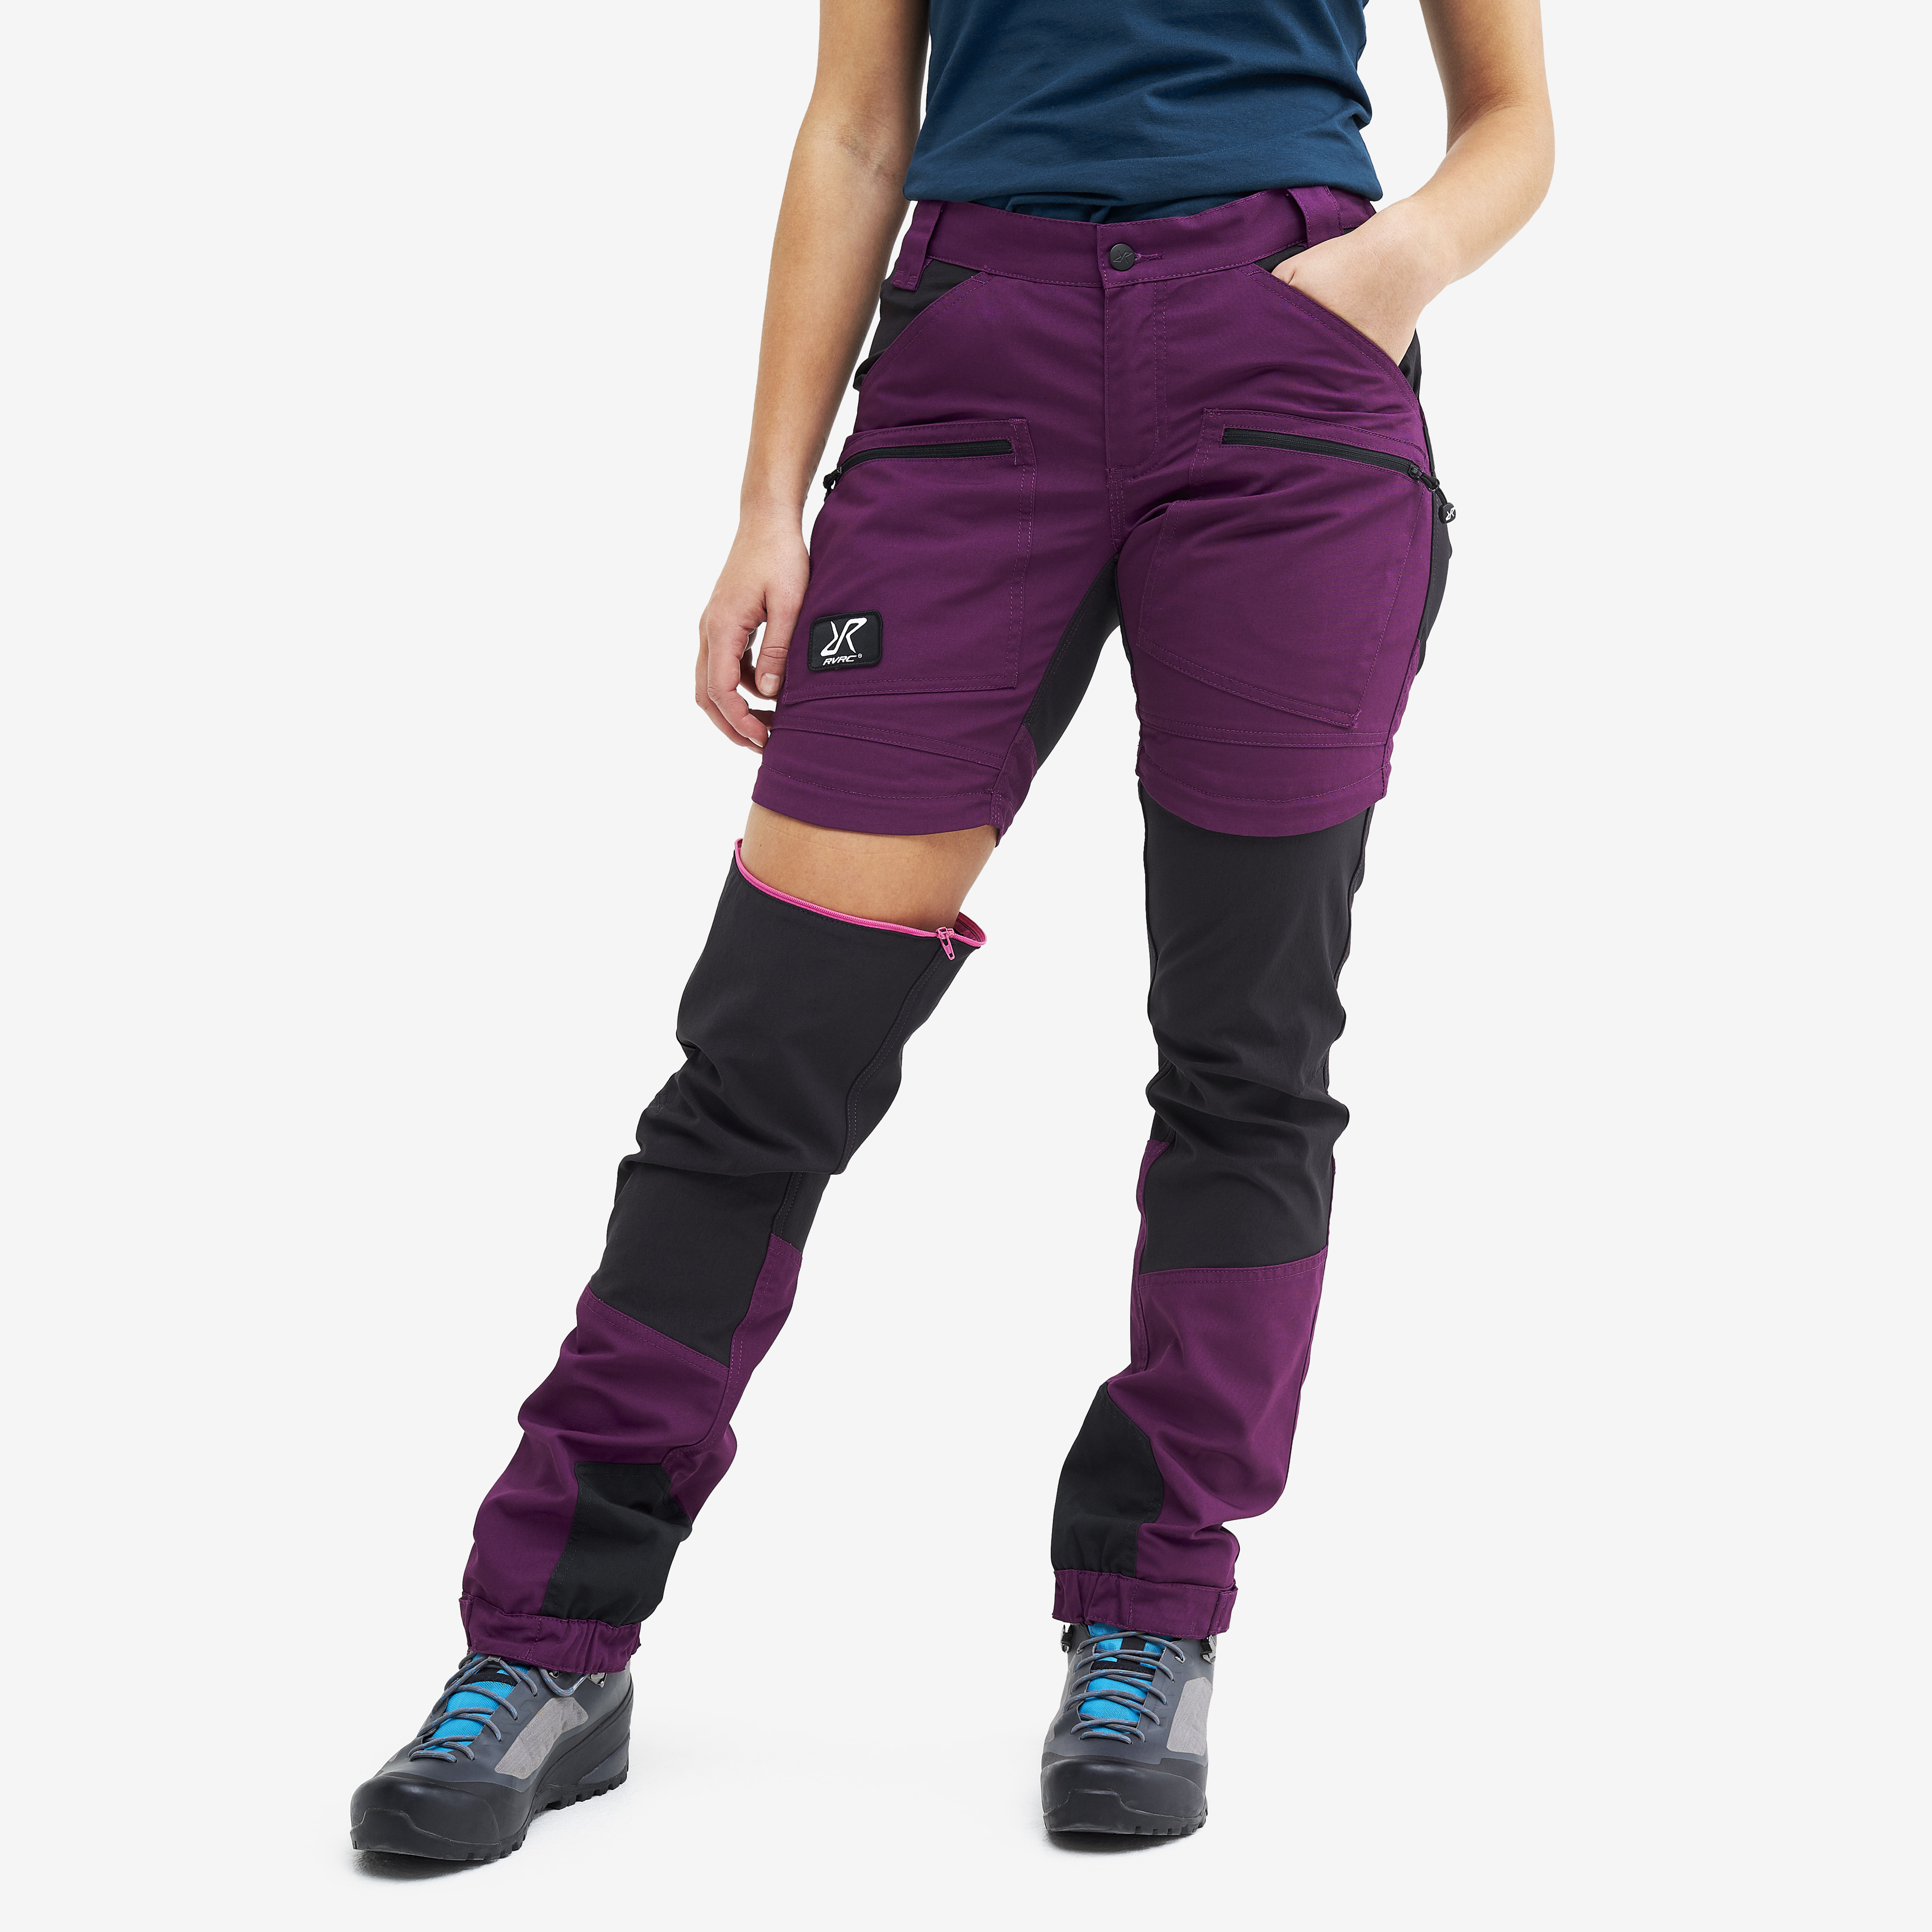 Nordwand Pro Zip-off hiking trousers for women in purple